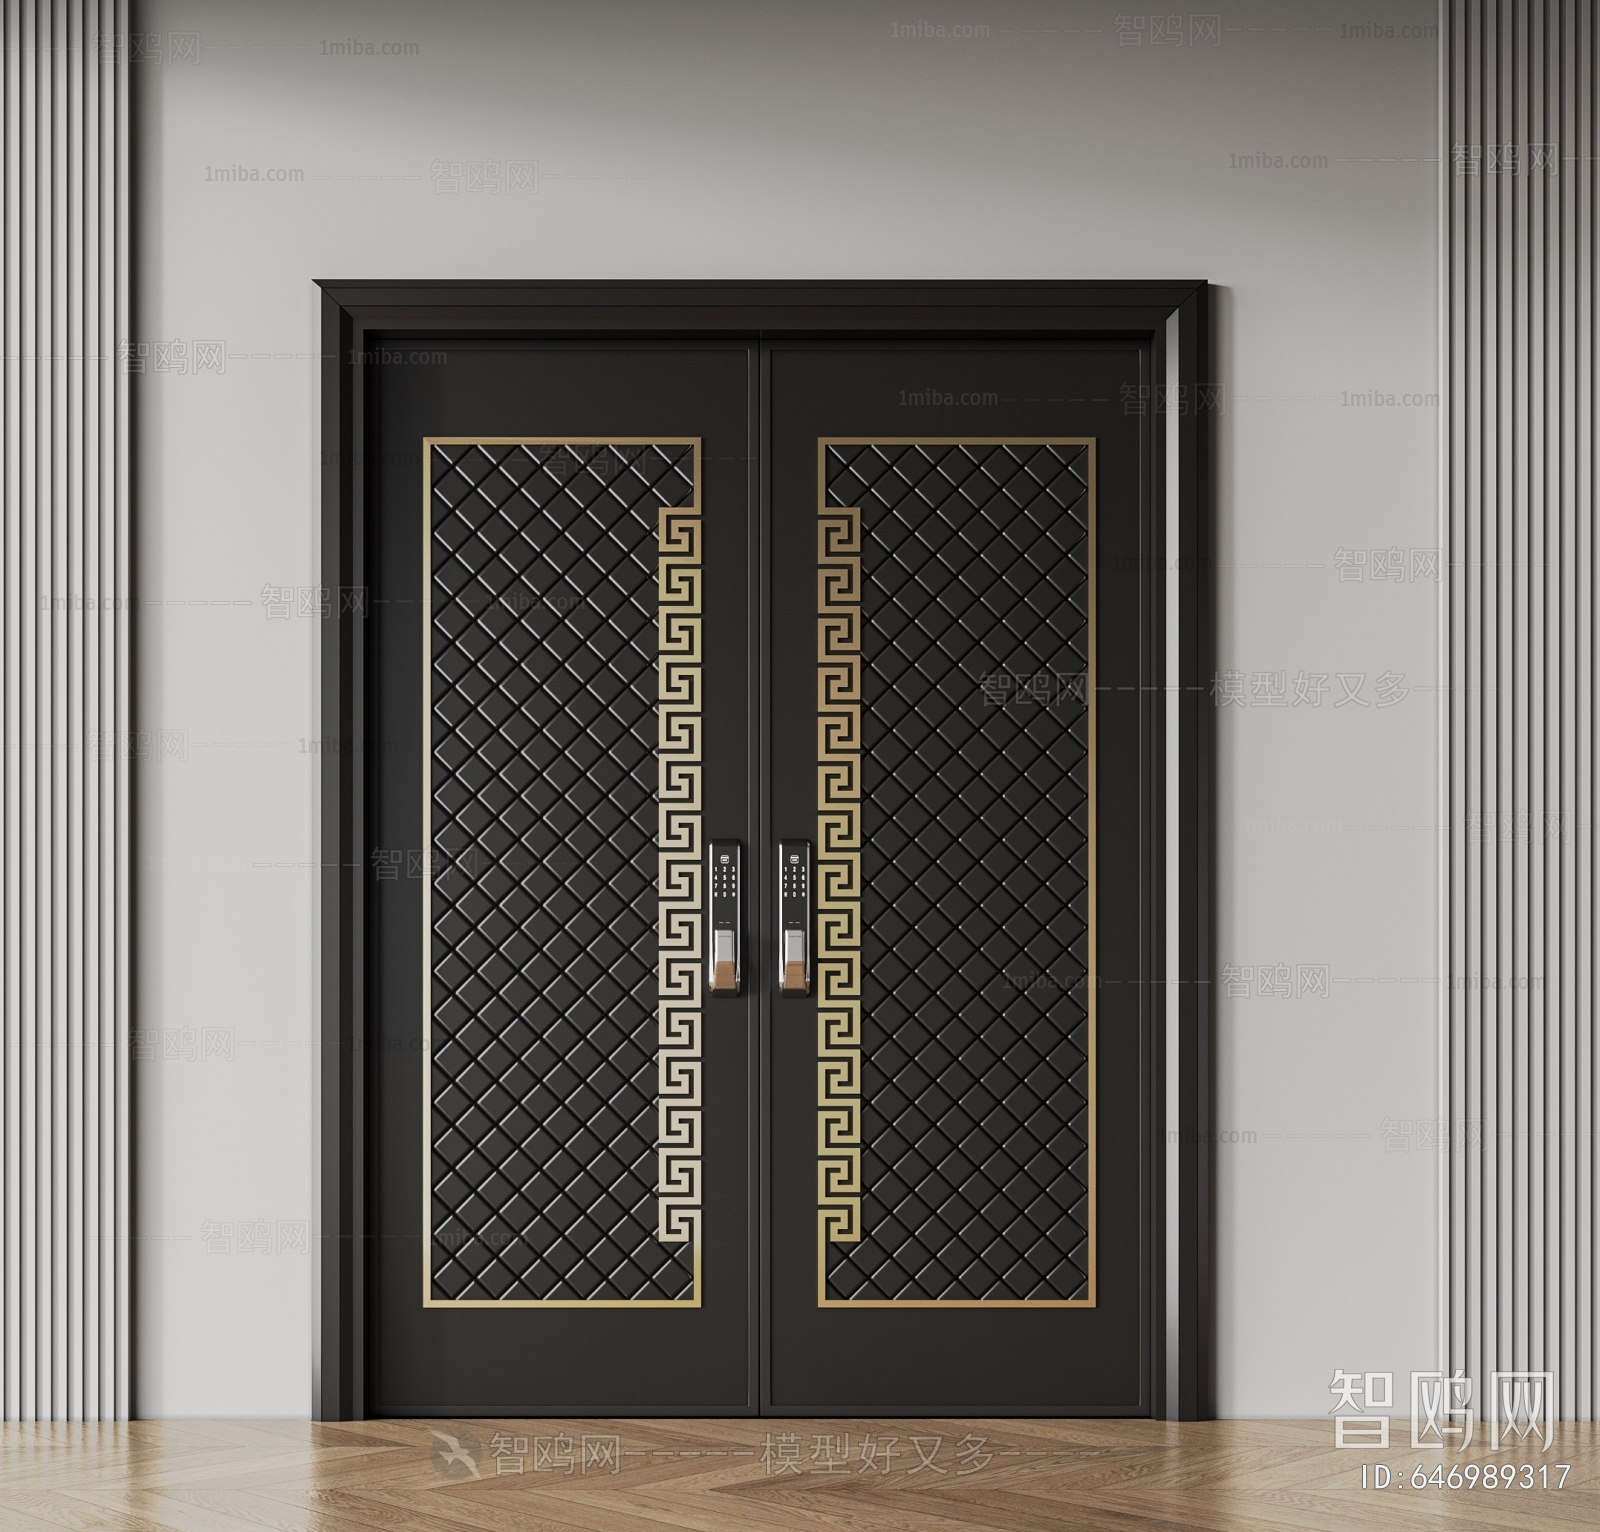 Chinese Style Entrance Door